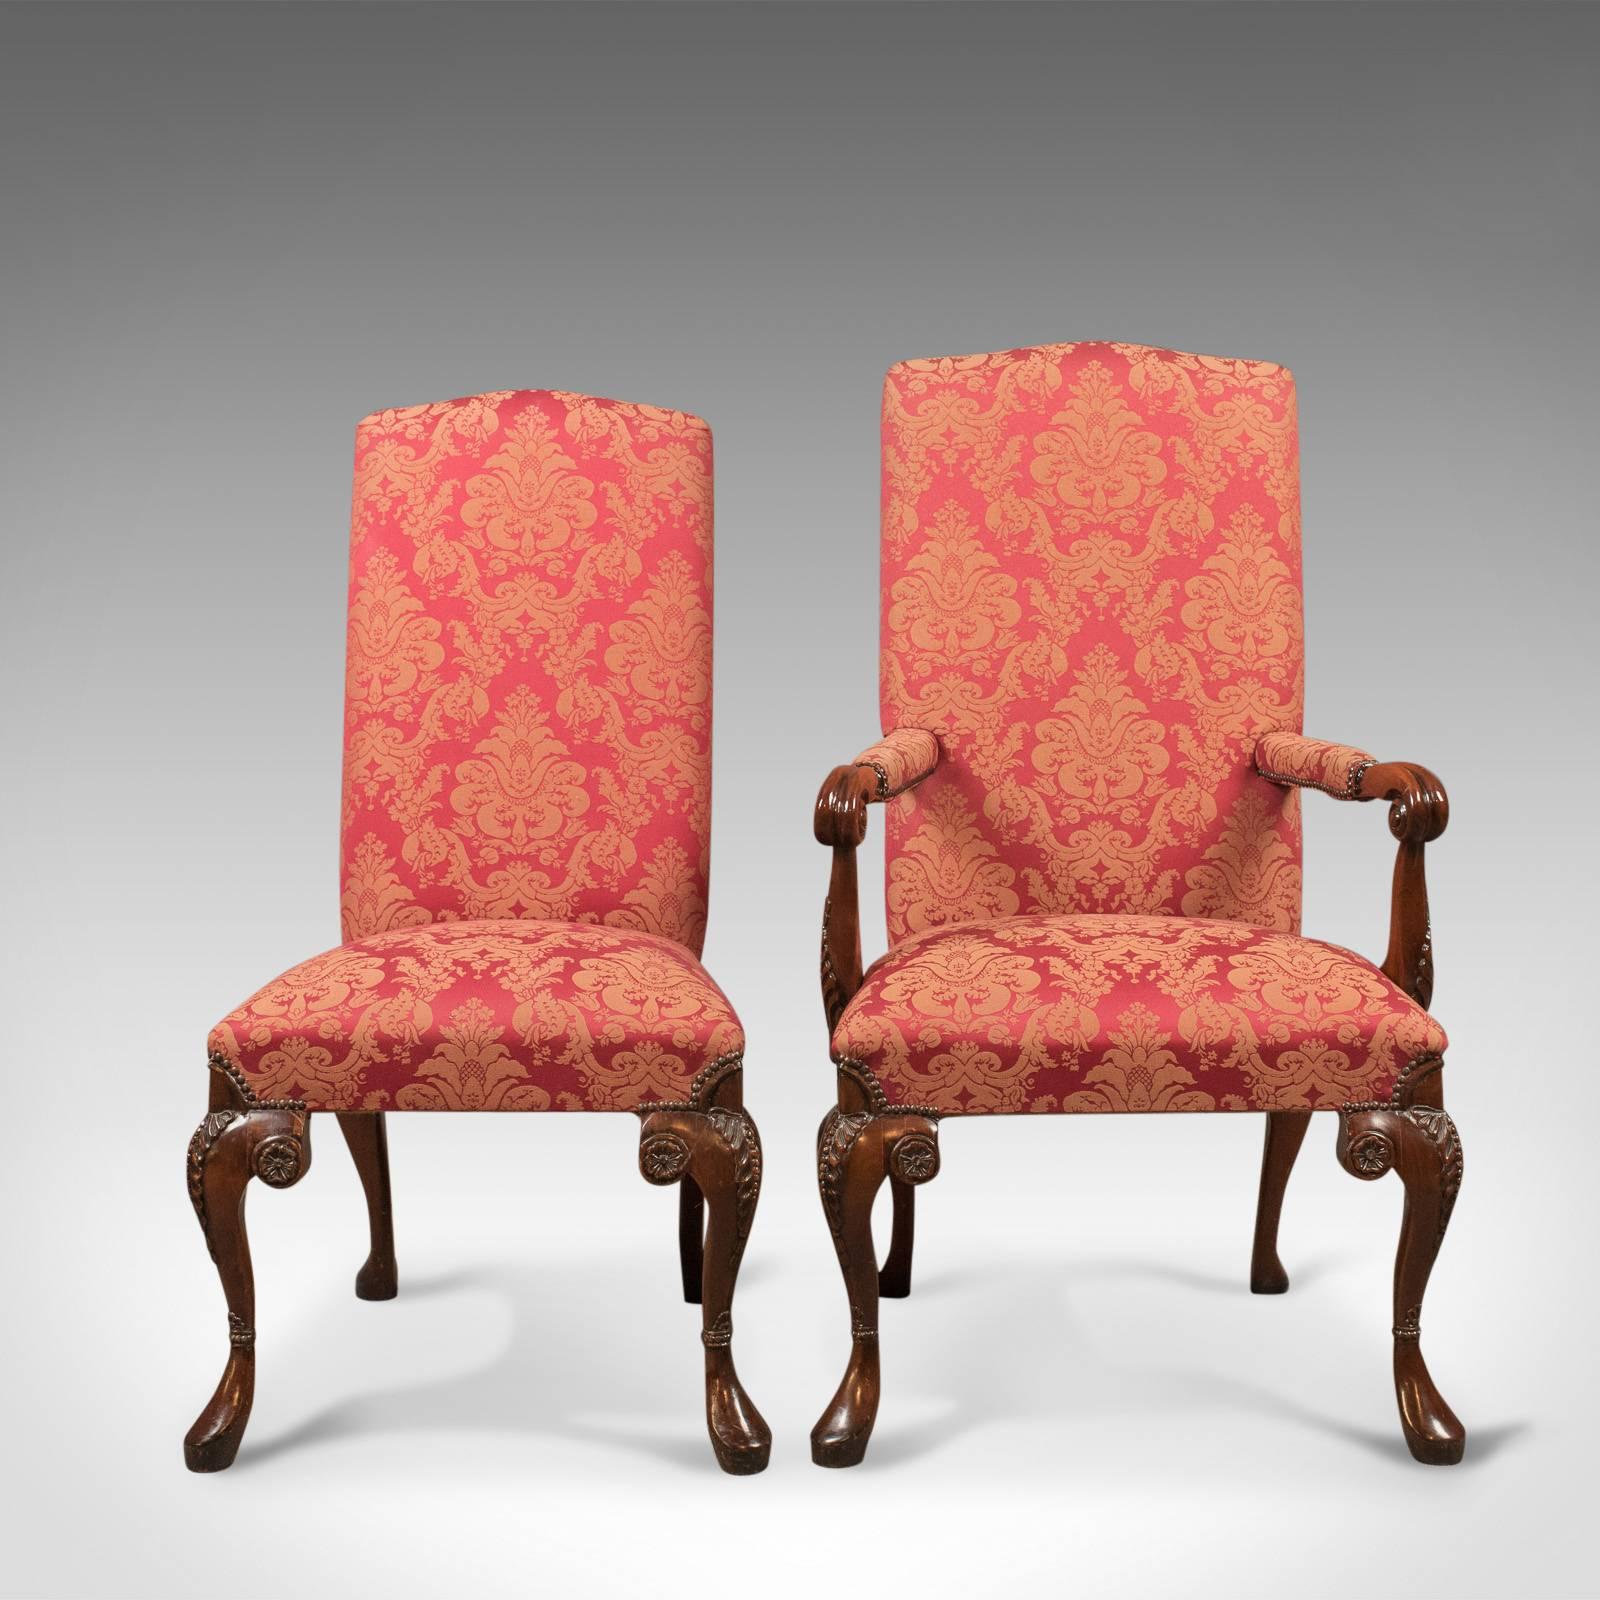 Georgian Set of Ten Upholstered Dining Chairs in Early 18th Century Manner, 20th Century